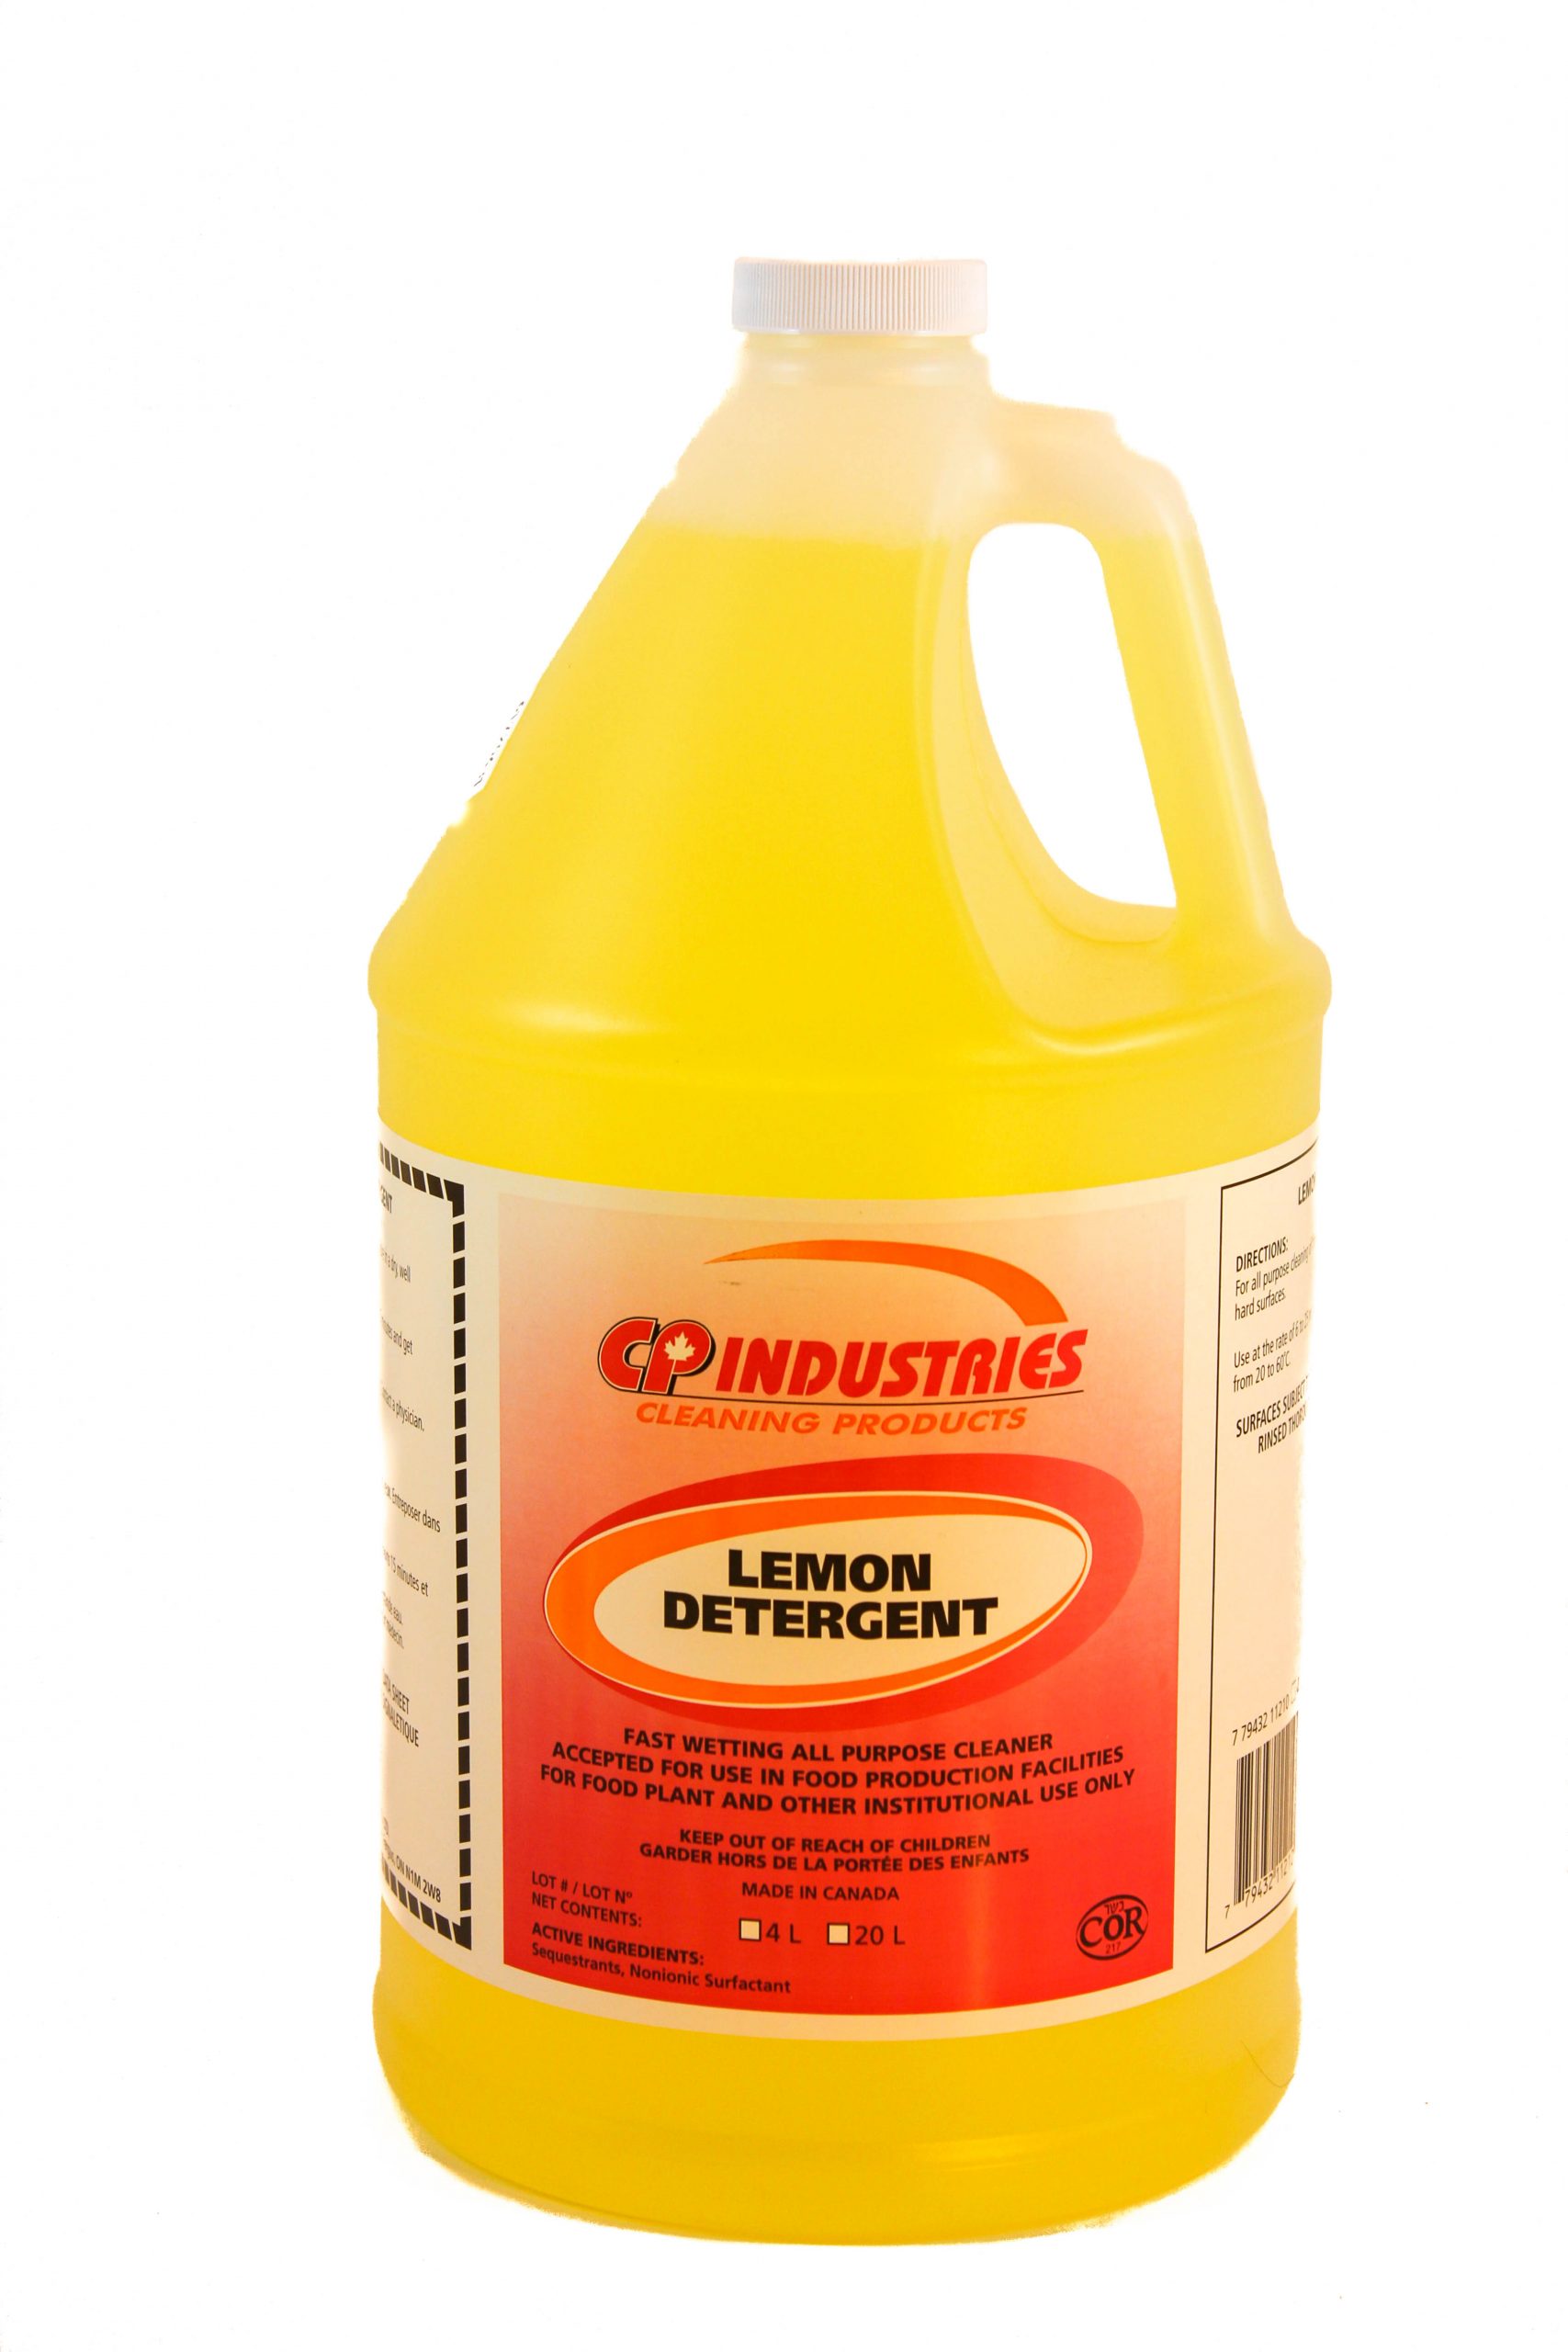 CP Industries - Lemon Detergent, fast wetting all purpose cleaner